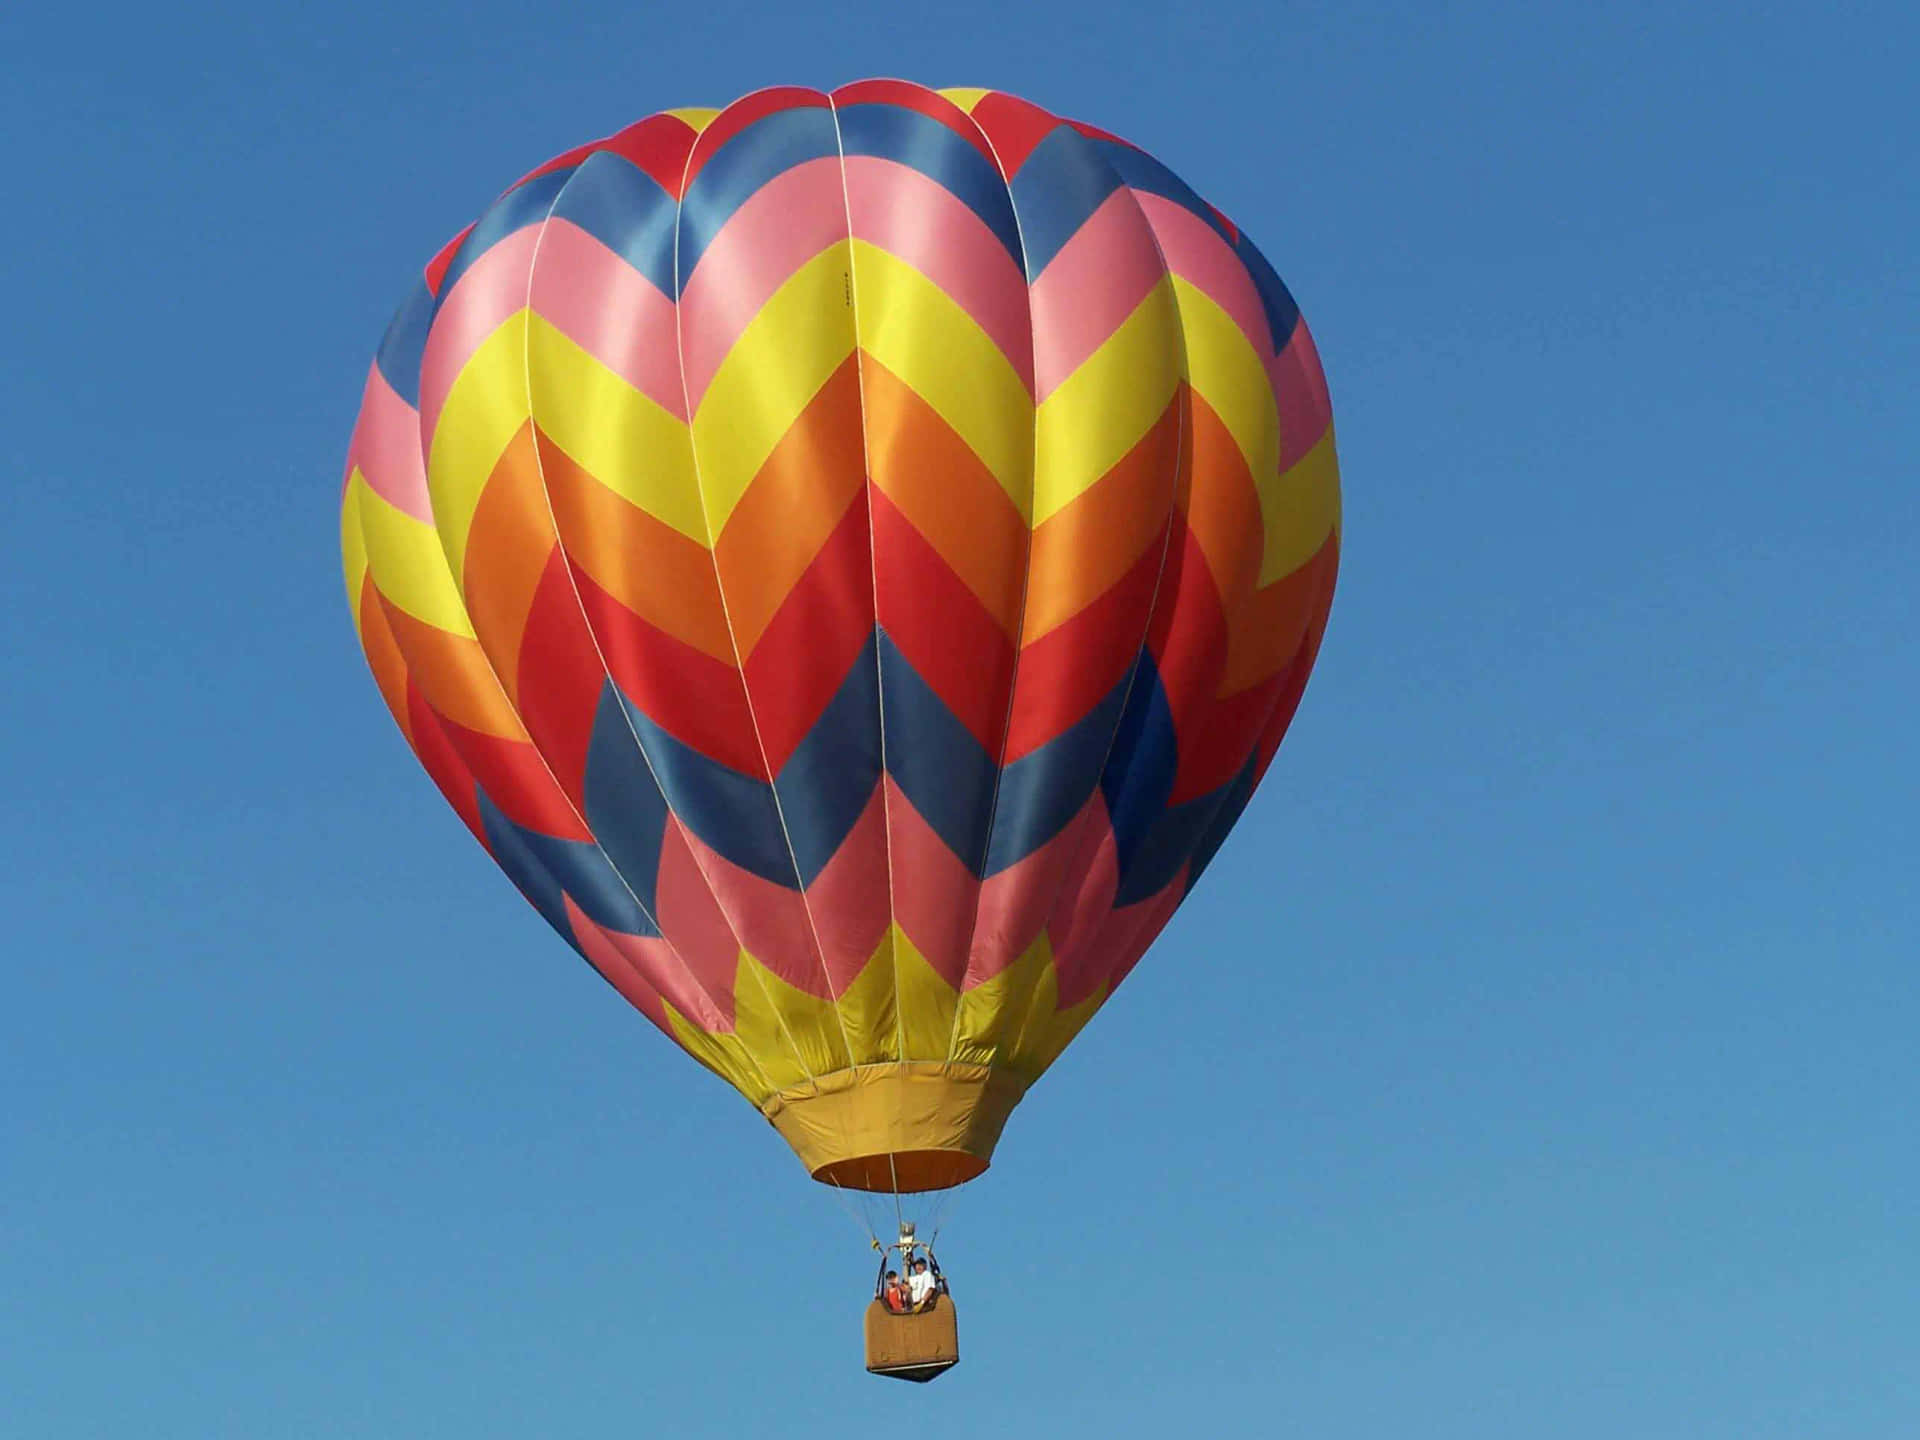 Soaring Through The Clouds in a Brightly Colored Hot Air Balloon